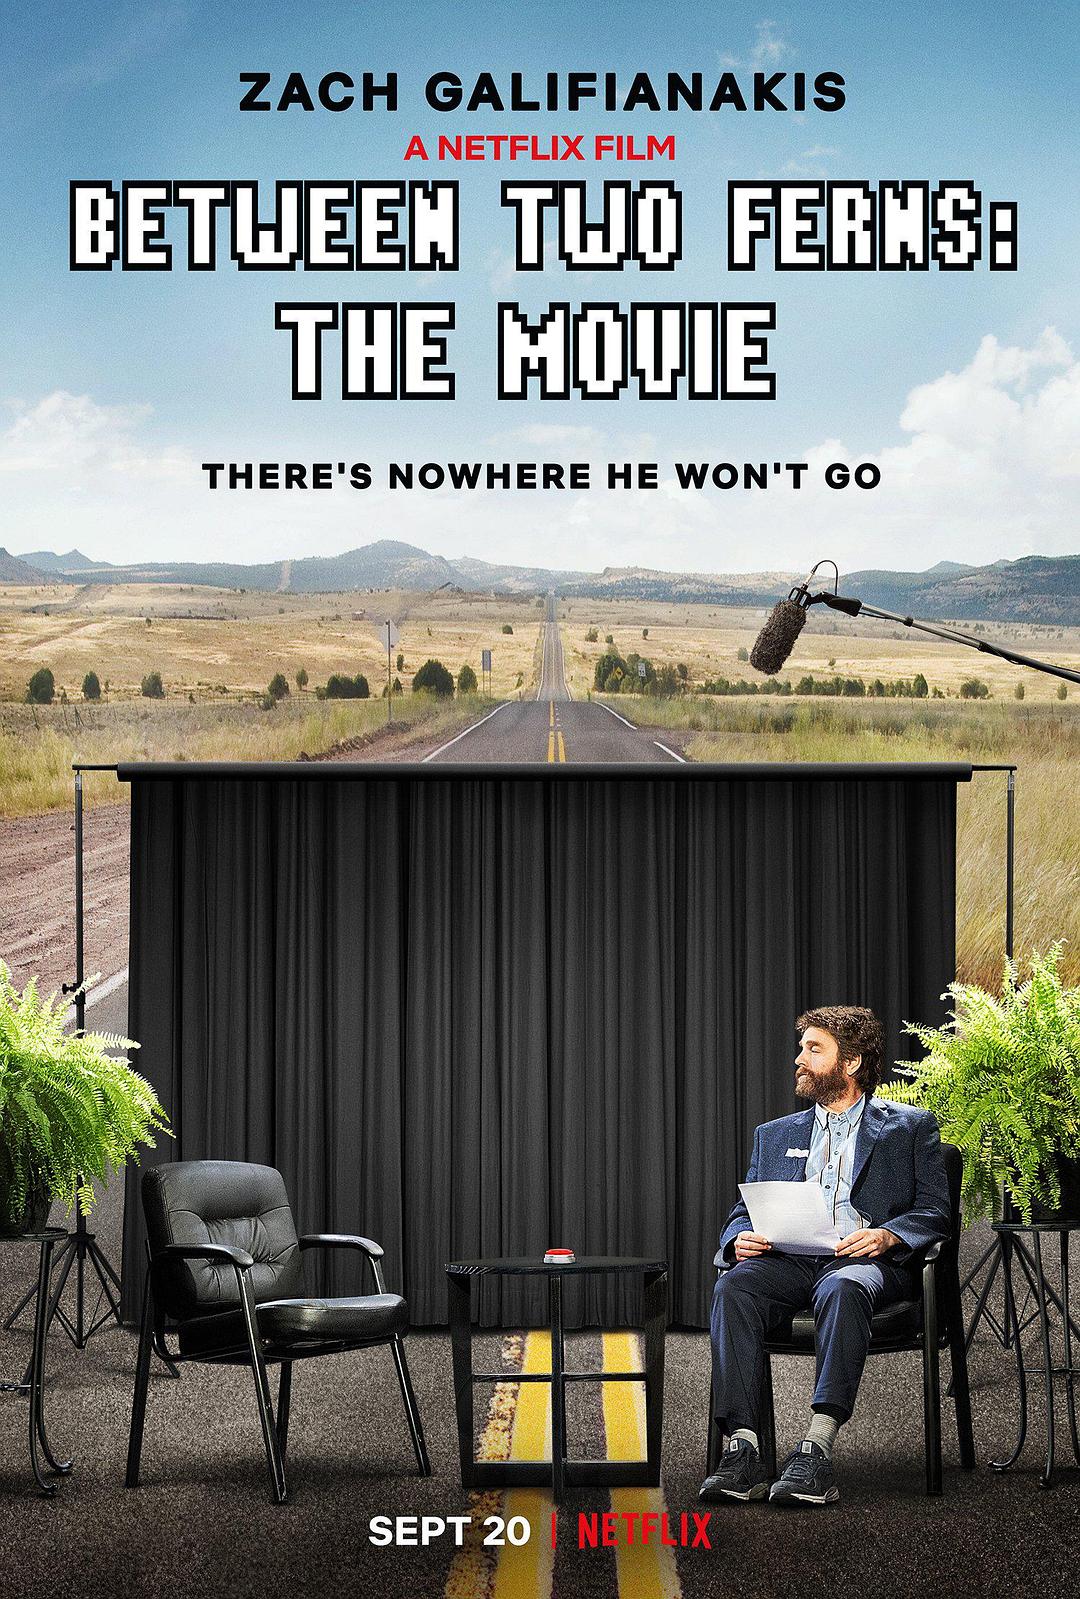 ާ̸:Ӱ/ѿ Between.Two.Ferns.The.Movie.2019.2160p.NF.WEBRip.x265.10bit.HDR.-1.png